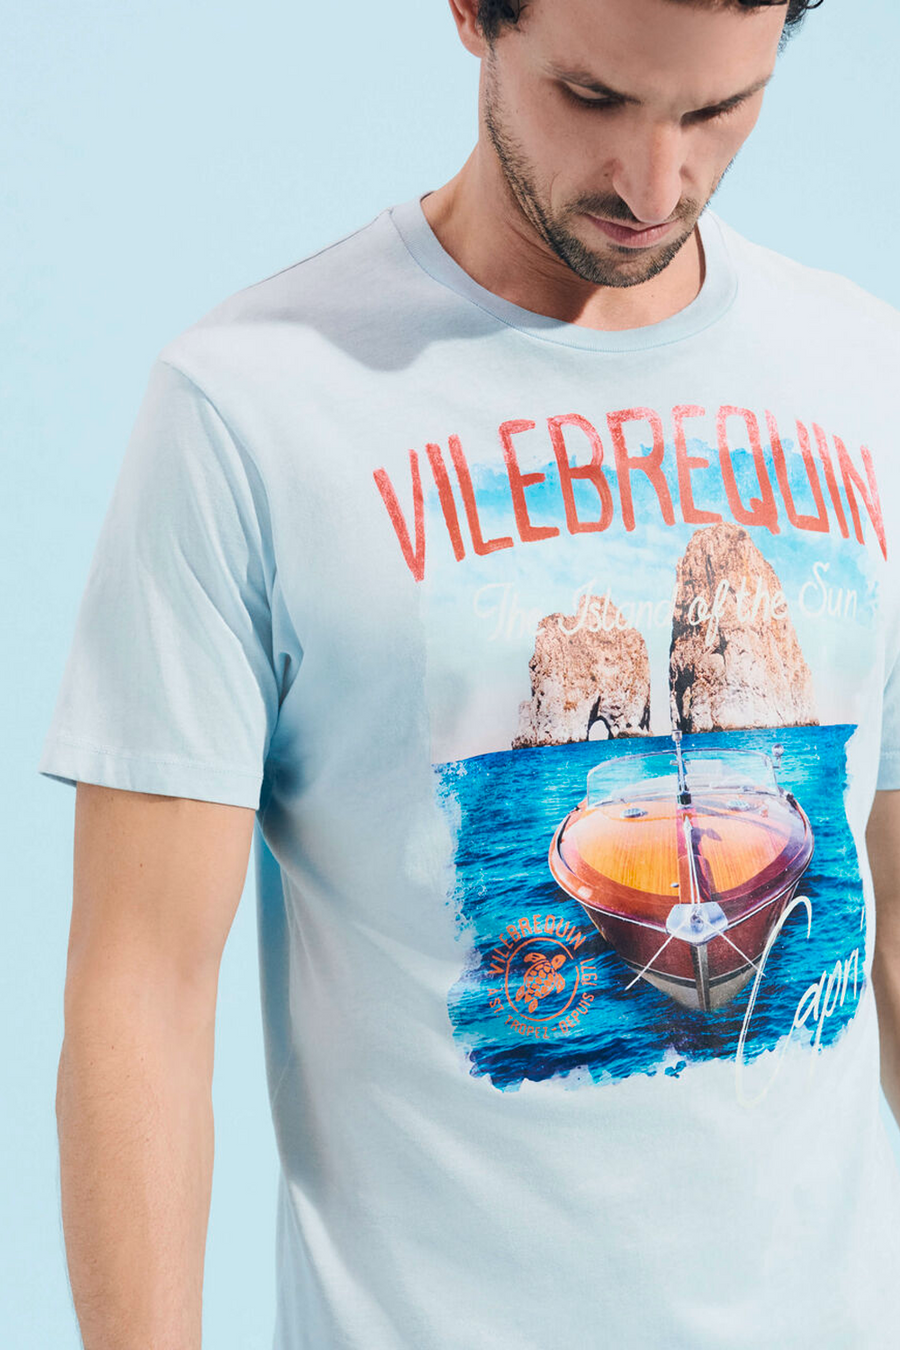 Buy the Vilebrequin Cotton T-shirt Capri in Blue at Intro. Spend £100 for free UK delivery. Official stockists. We ship worldwide.